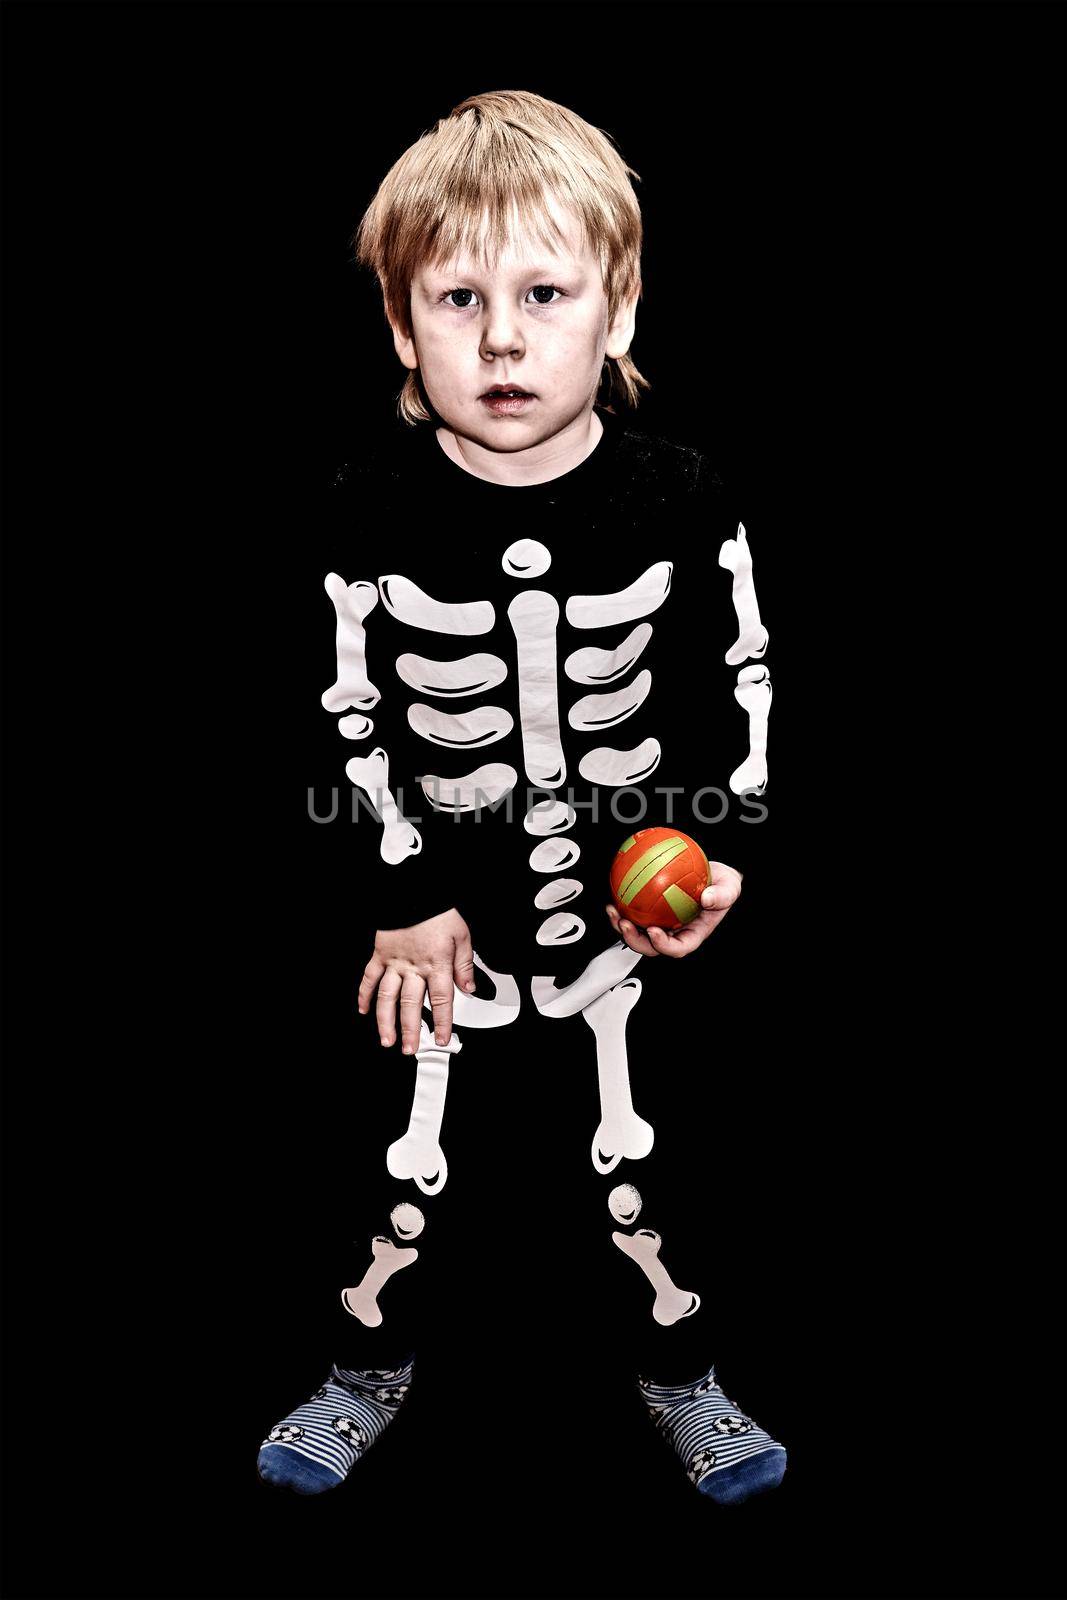 A child in a skeleton costume with an orange ball in his hand, black background by vizland